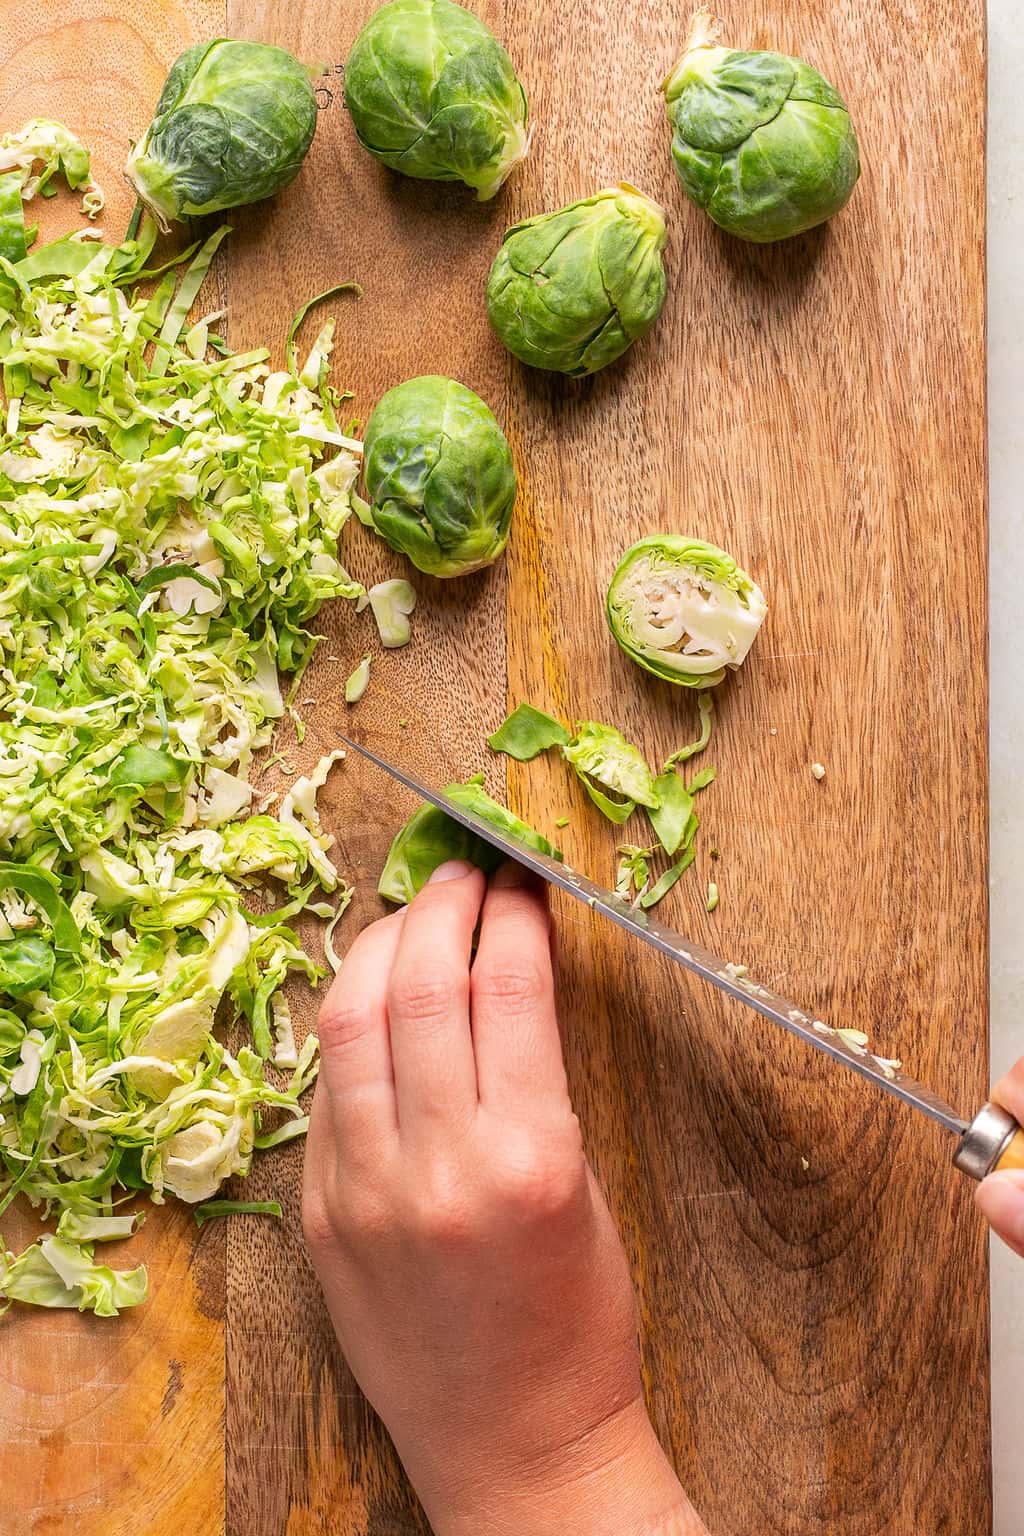 shredding brussels sprouts on a cutting board